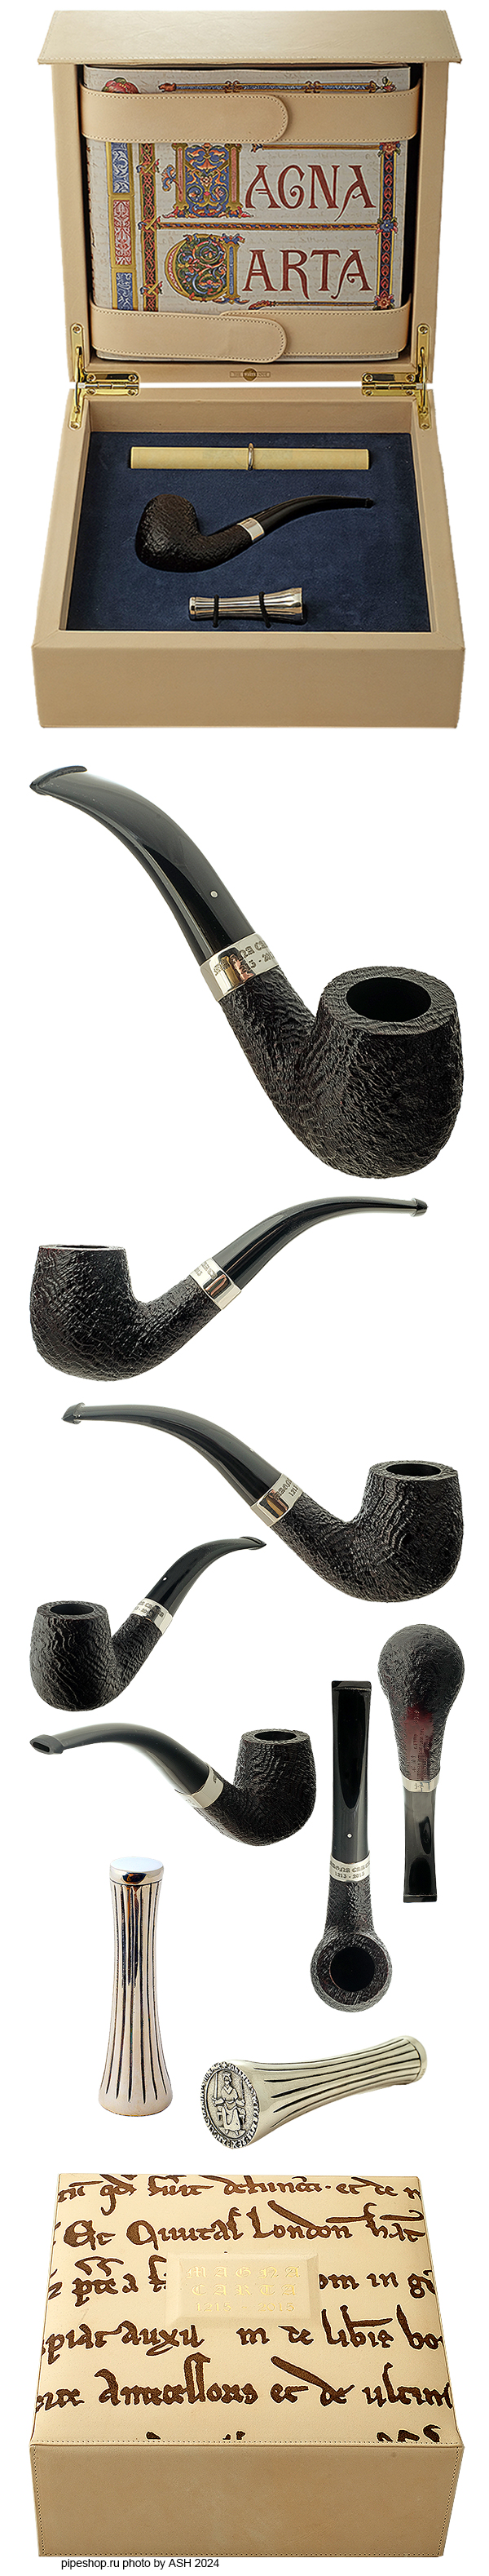   ALFRED DUNHILL`S THE WHITE SPOT "MAGNA CARTA 1215-2015" SHELL BRIAR 4102 #4 of 200 (2015)